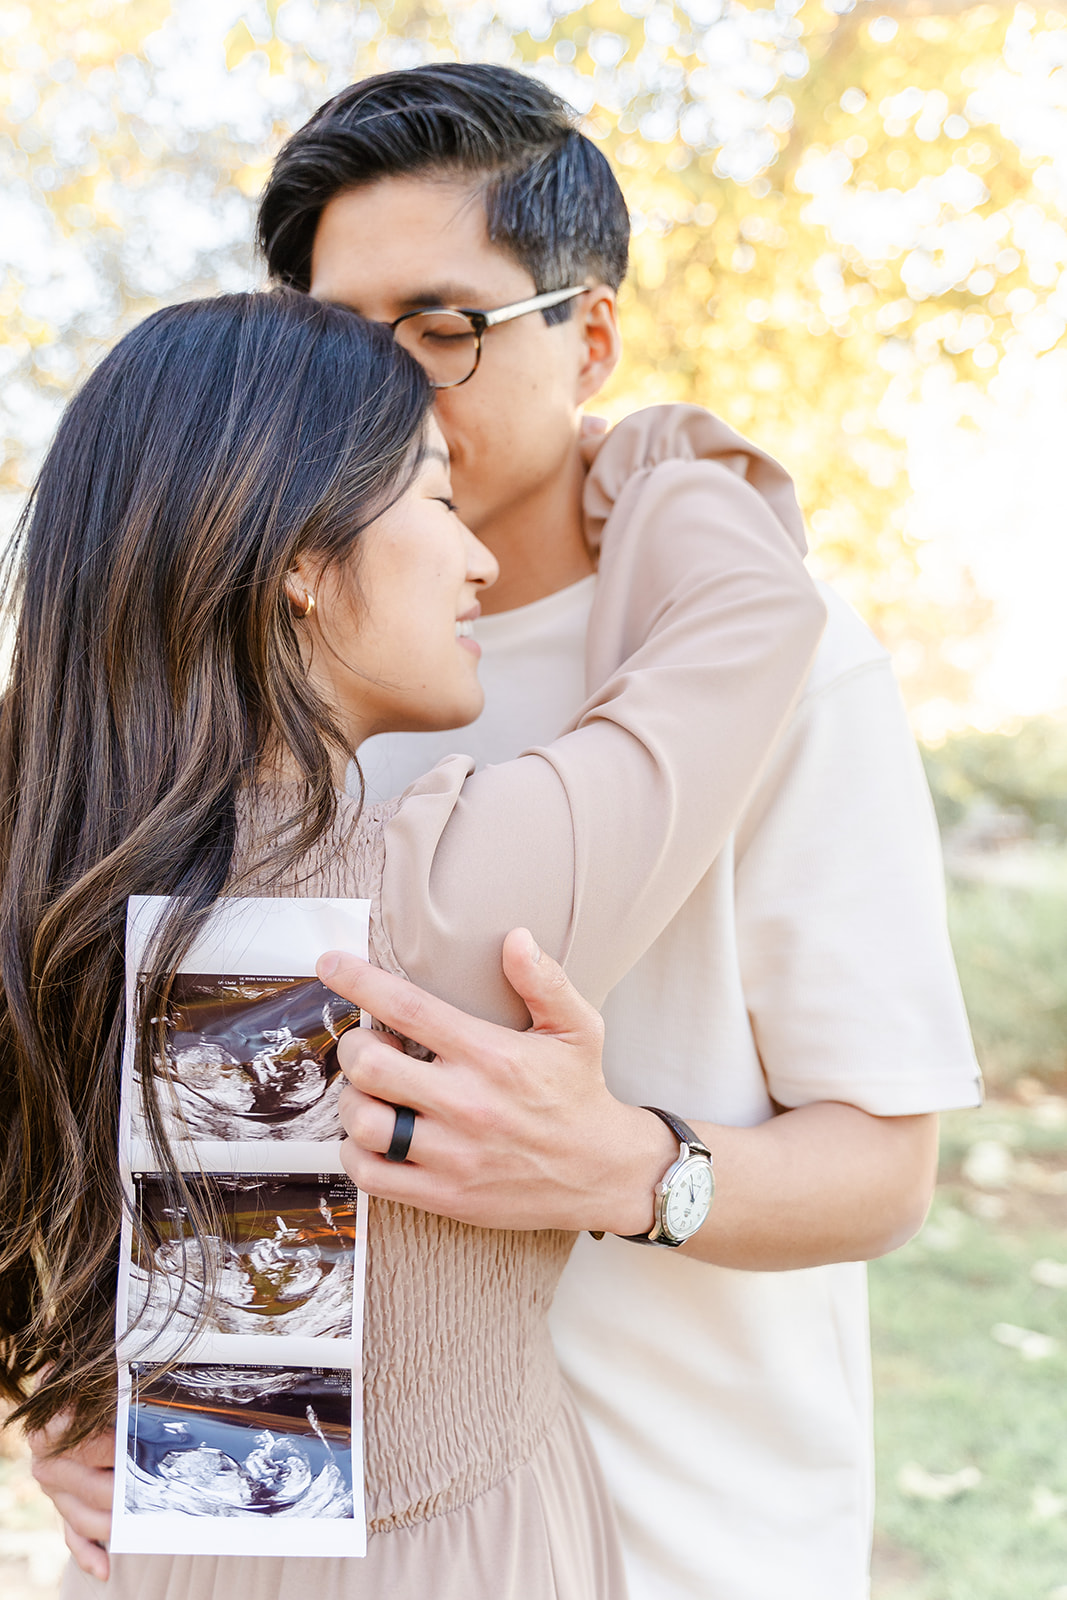 Expecting parents hug while holding the sonogram in a park at sunset thanks to an OBGYN Orange County